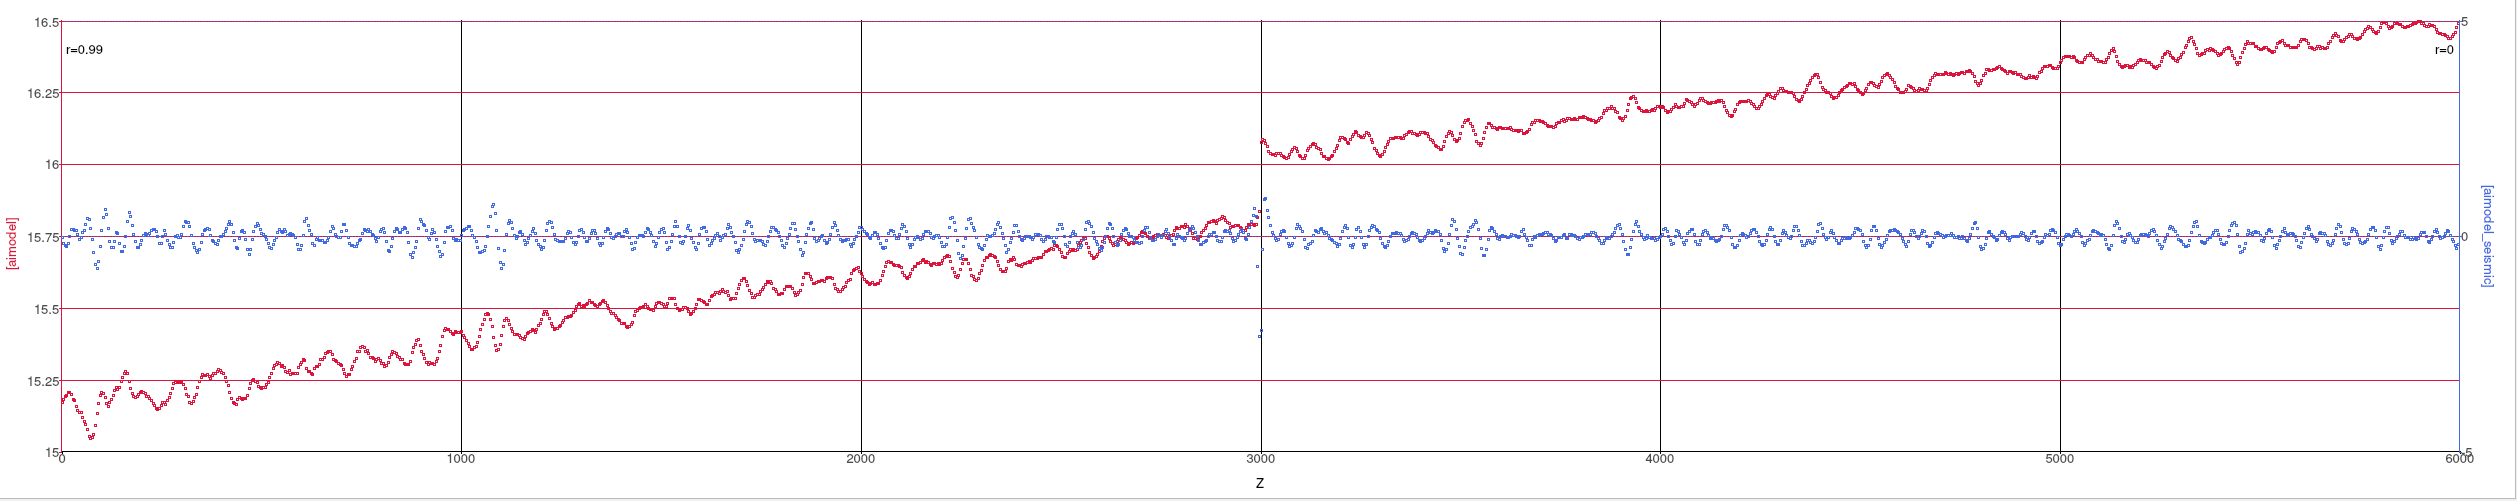 Impedance Model (red) and Seismic Model (blue)